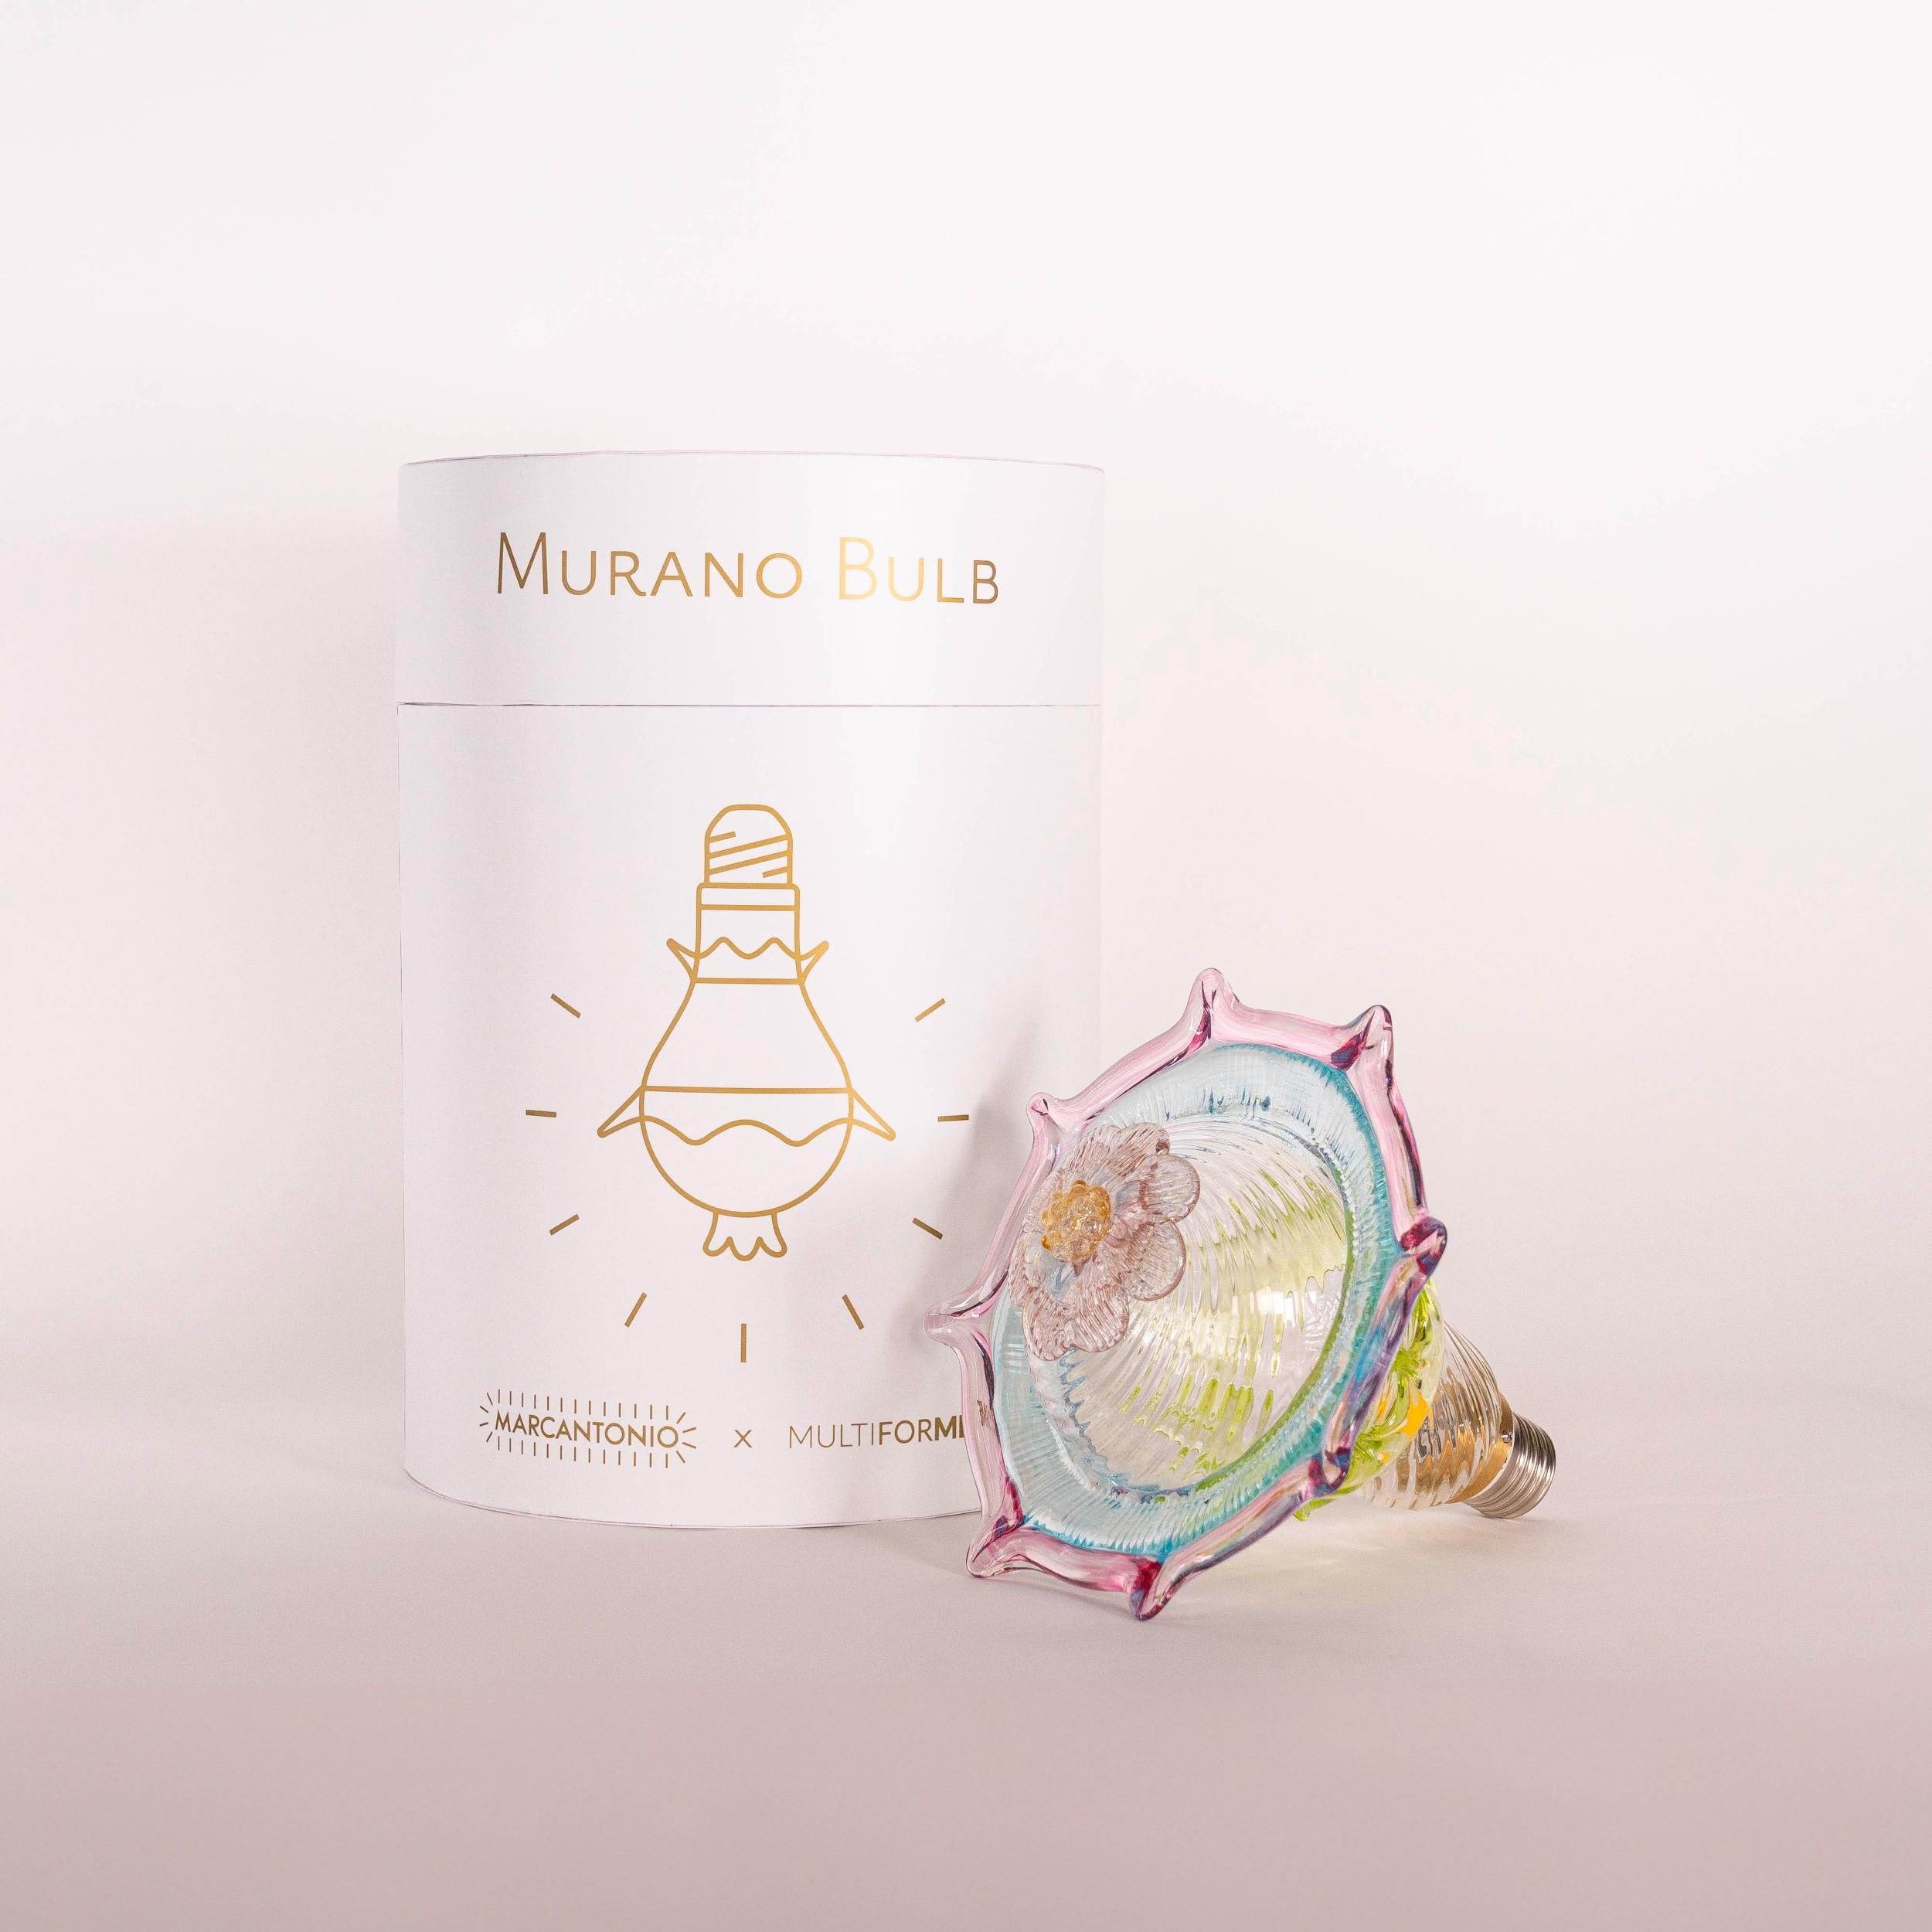 The art of Murano glass meets the iconicity of a bulb, together they give rise to a brilliant piece of furniture: a lightbulb, a chandelier or whatever your imagination suggests.

Murano Bulb, your lightbulb moment.

The Murano Bulb project designed